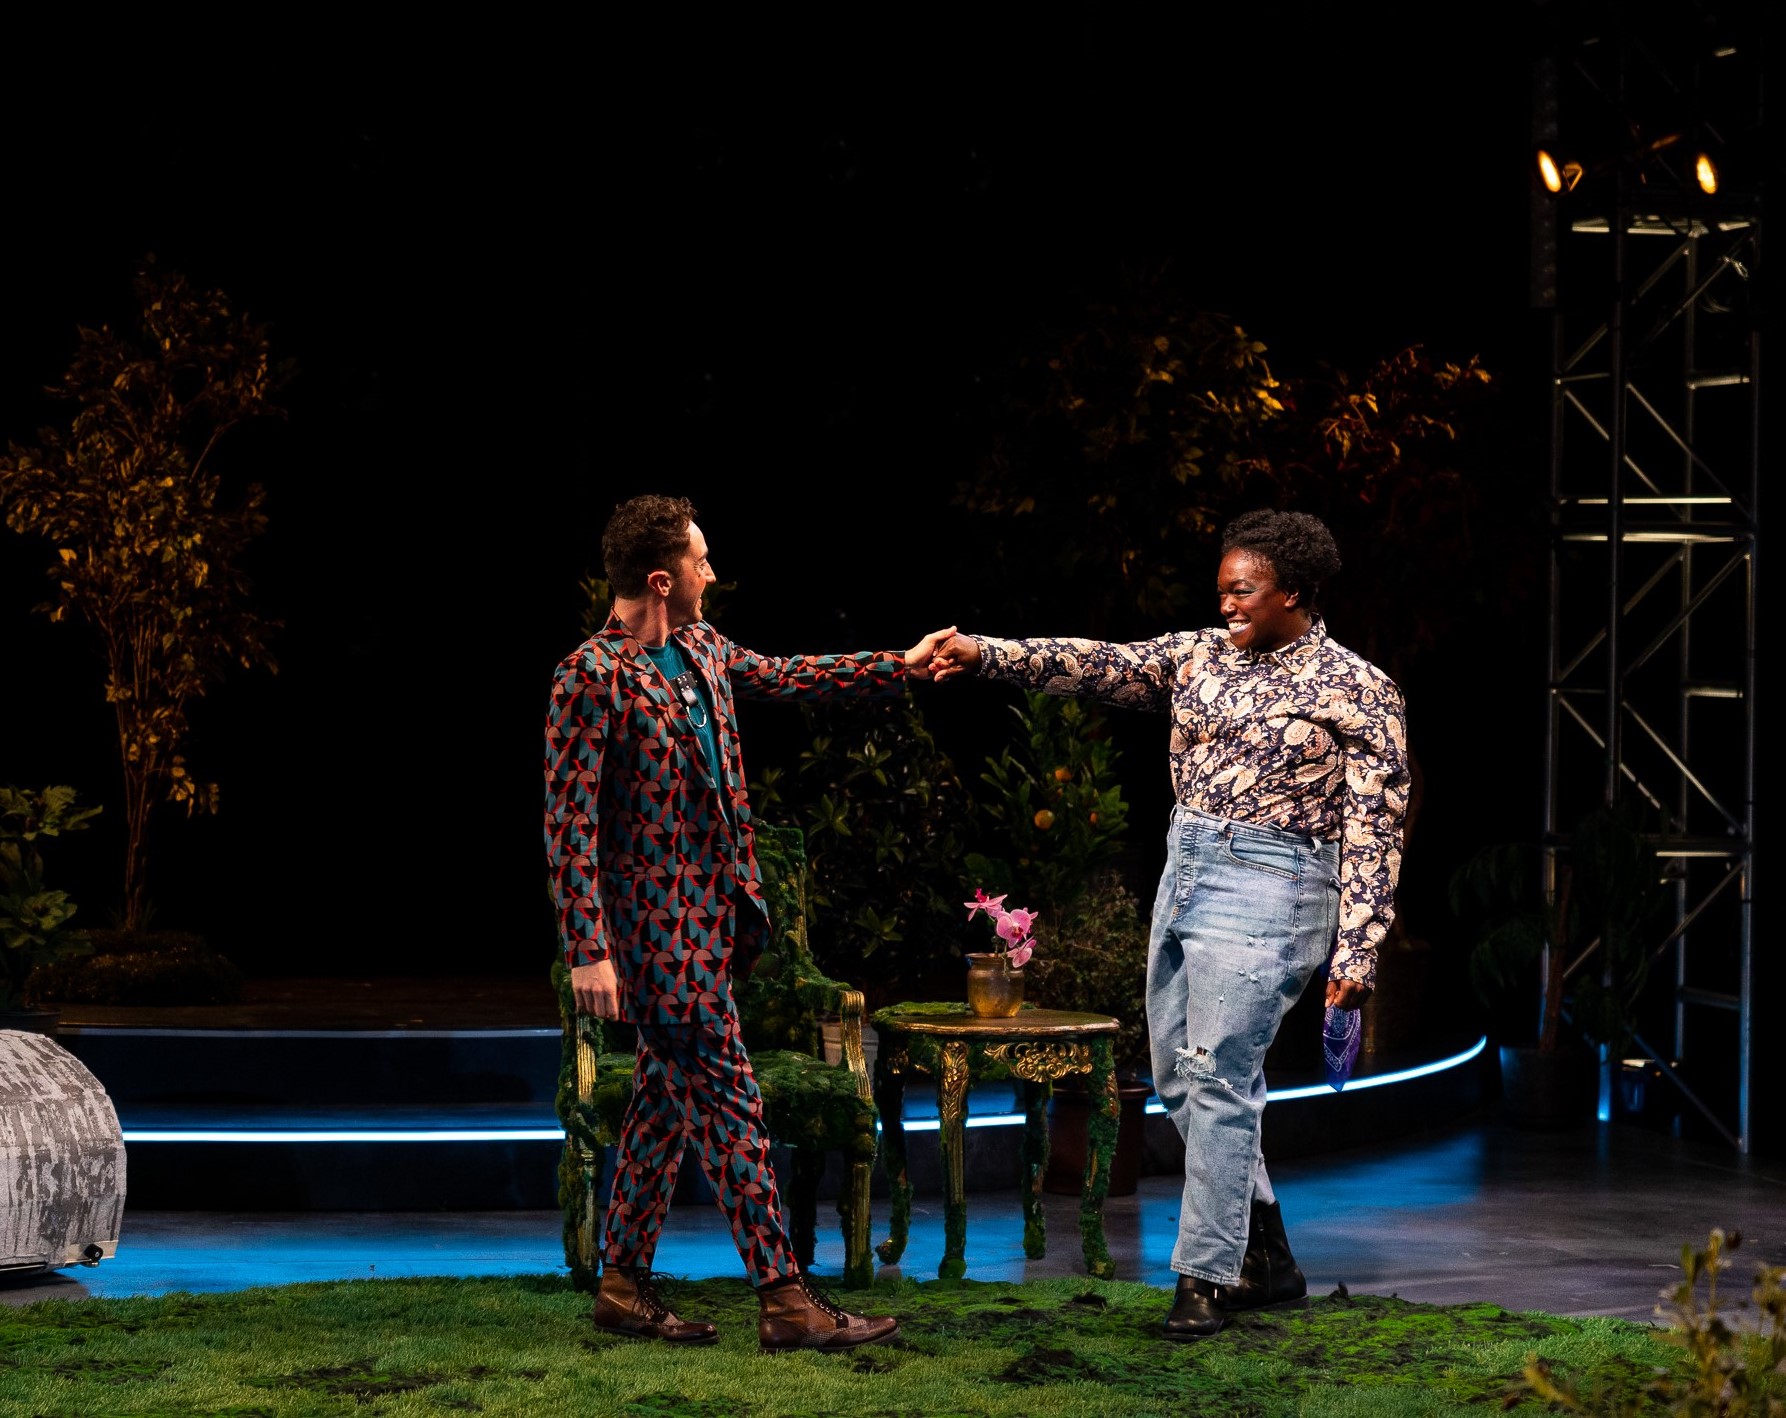 Cody Sloan as “Touchstone” and Taiwo Sokan as “Audrey” in La Jolla Playhouse’s production of AS YOU LIKE IT, by William Shakespeare, co-directed by Christopher Ashley and Will Davis, running through December 11, produced in association with Diversionary Theatre; photo by Rich Soublet II.